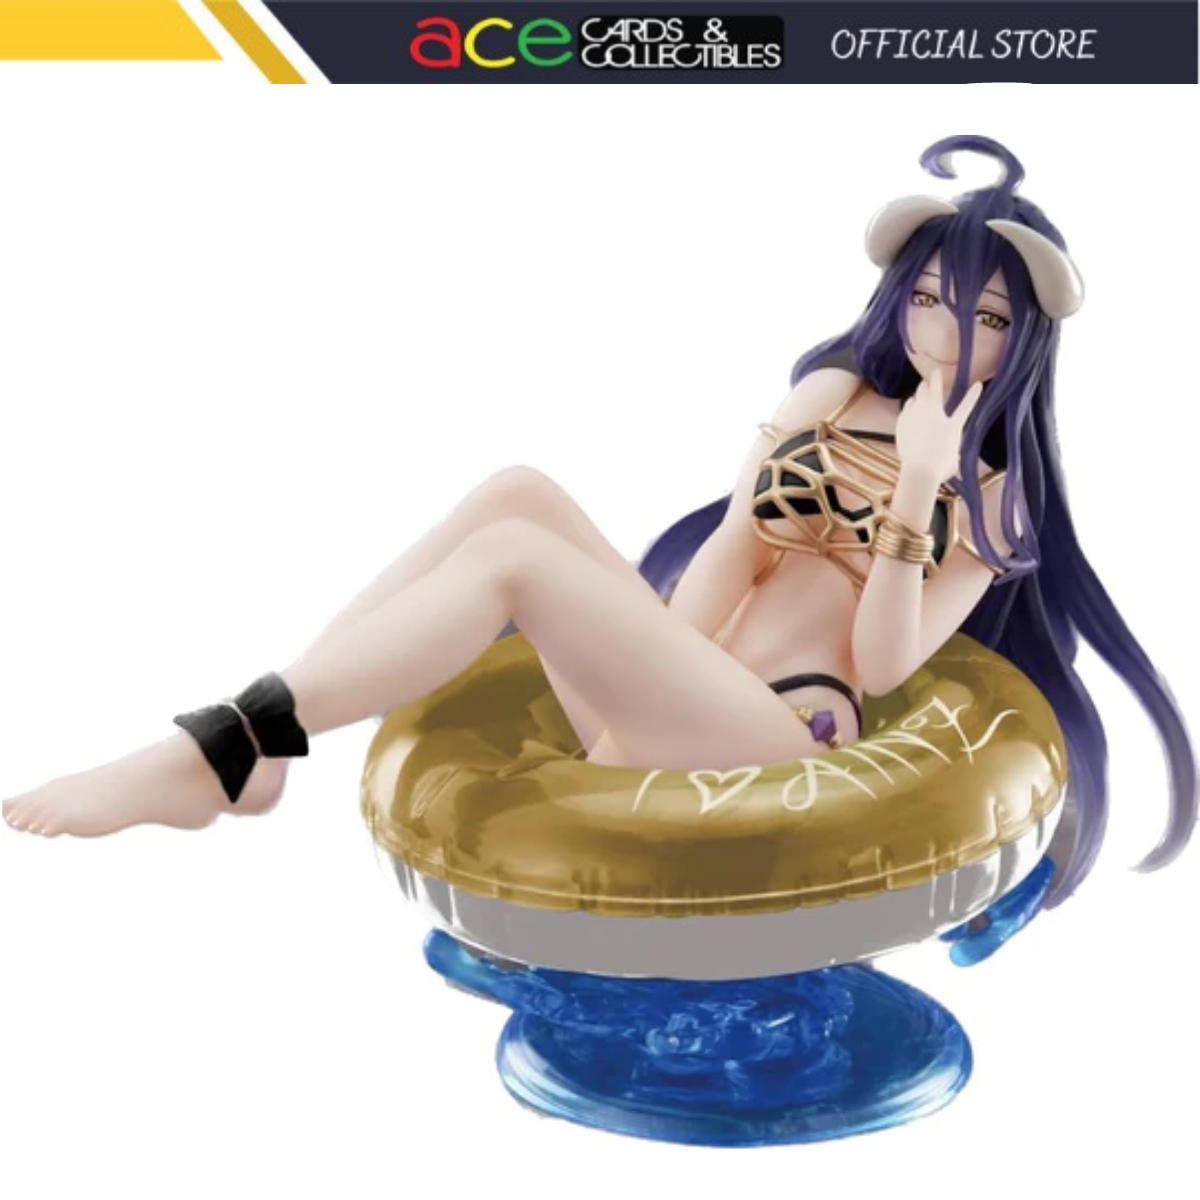 Overlord IV Aqua Float Girls Figure "Albedo" (Renewal Edition)-Taito-Ace Cards & Collectibles